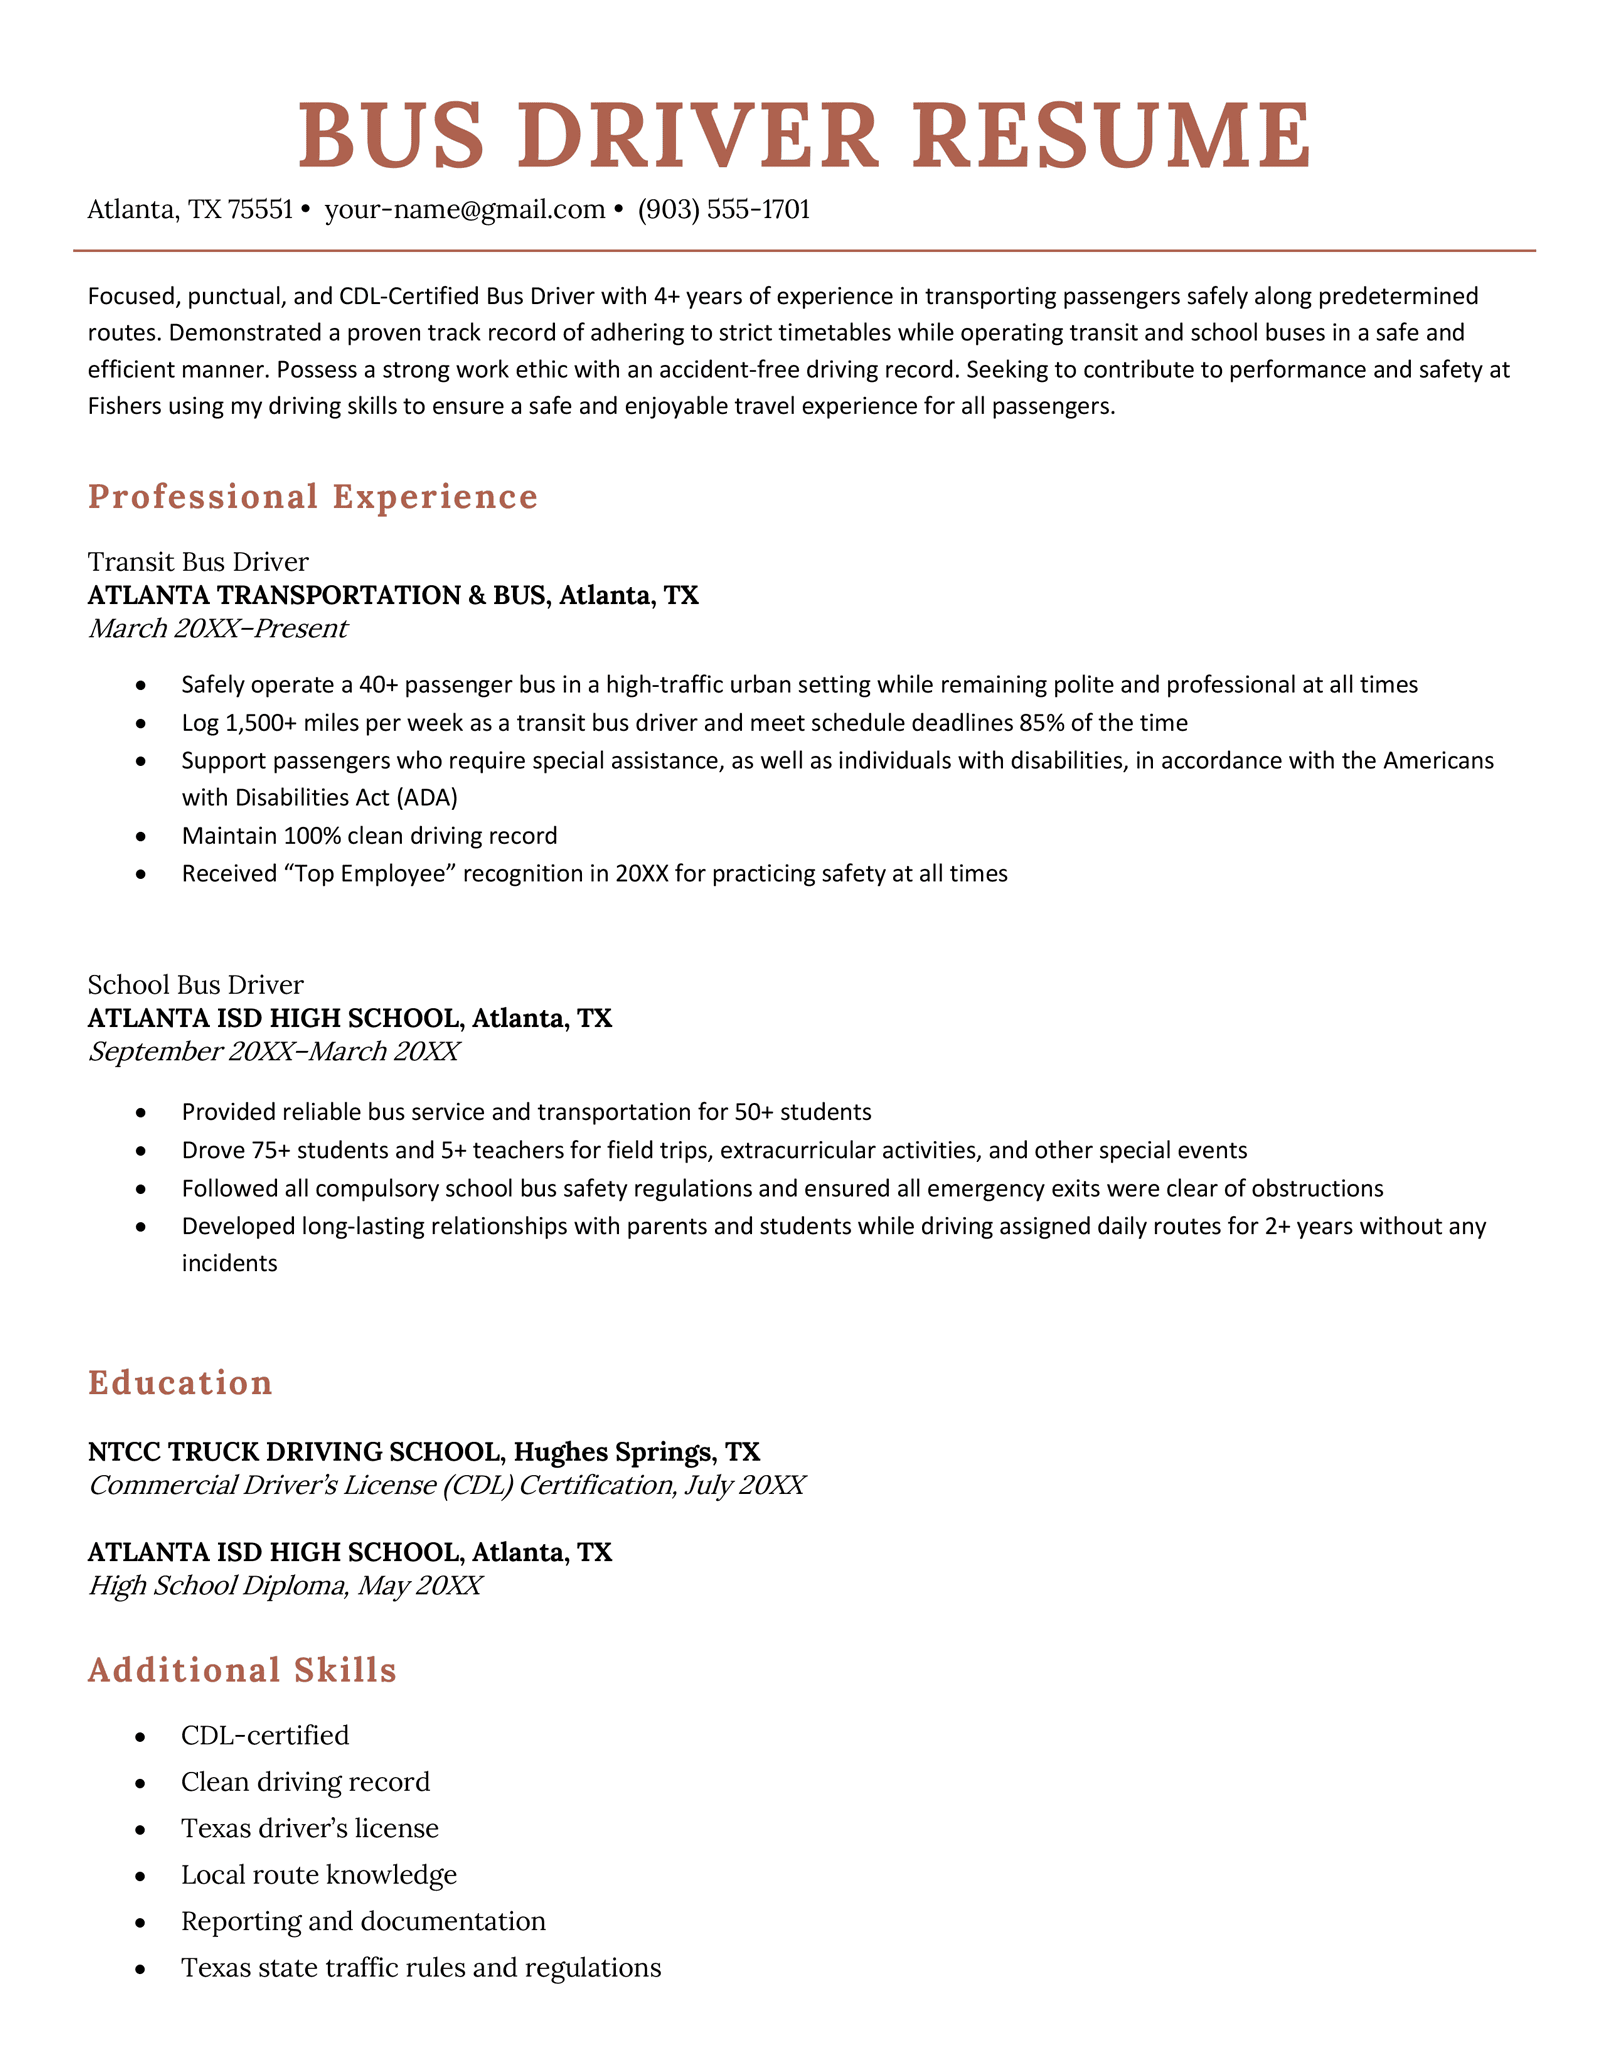 A clean and simple bus driver resume sample with a horizontal header and orange font highlighting the name, professional experience, education and additional skills sections